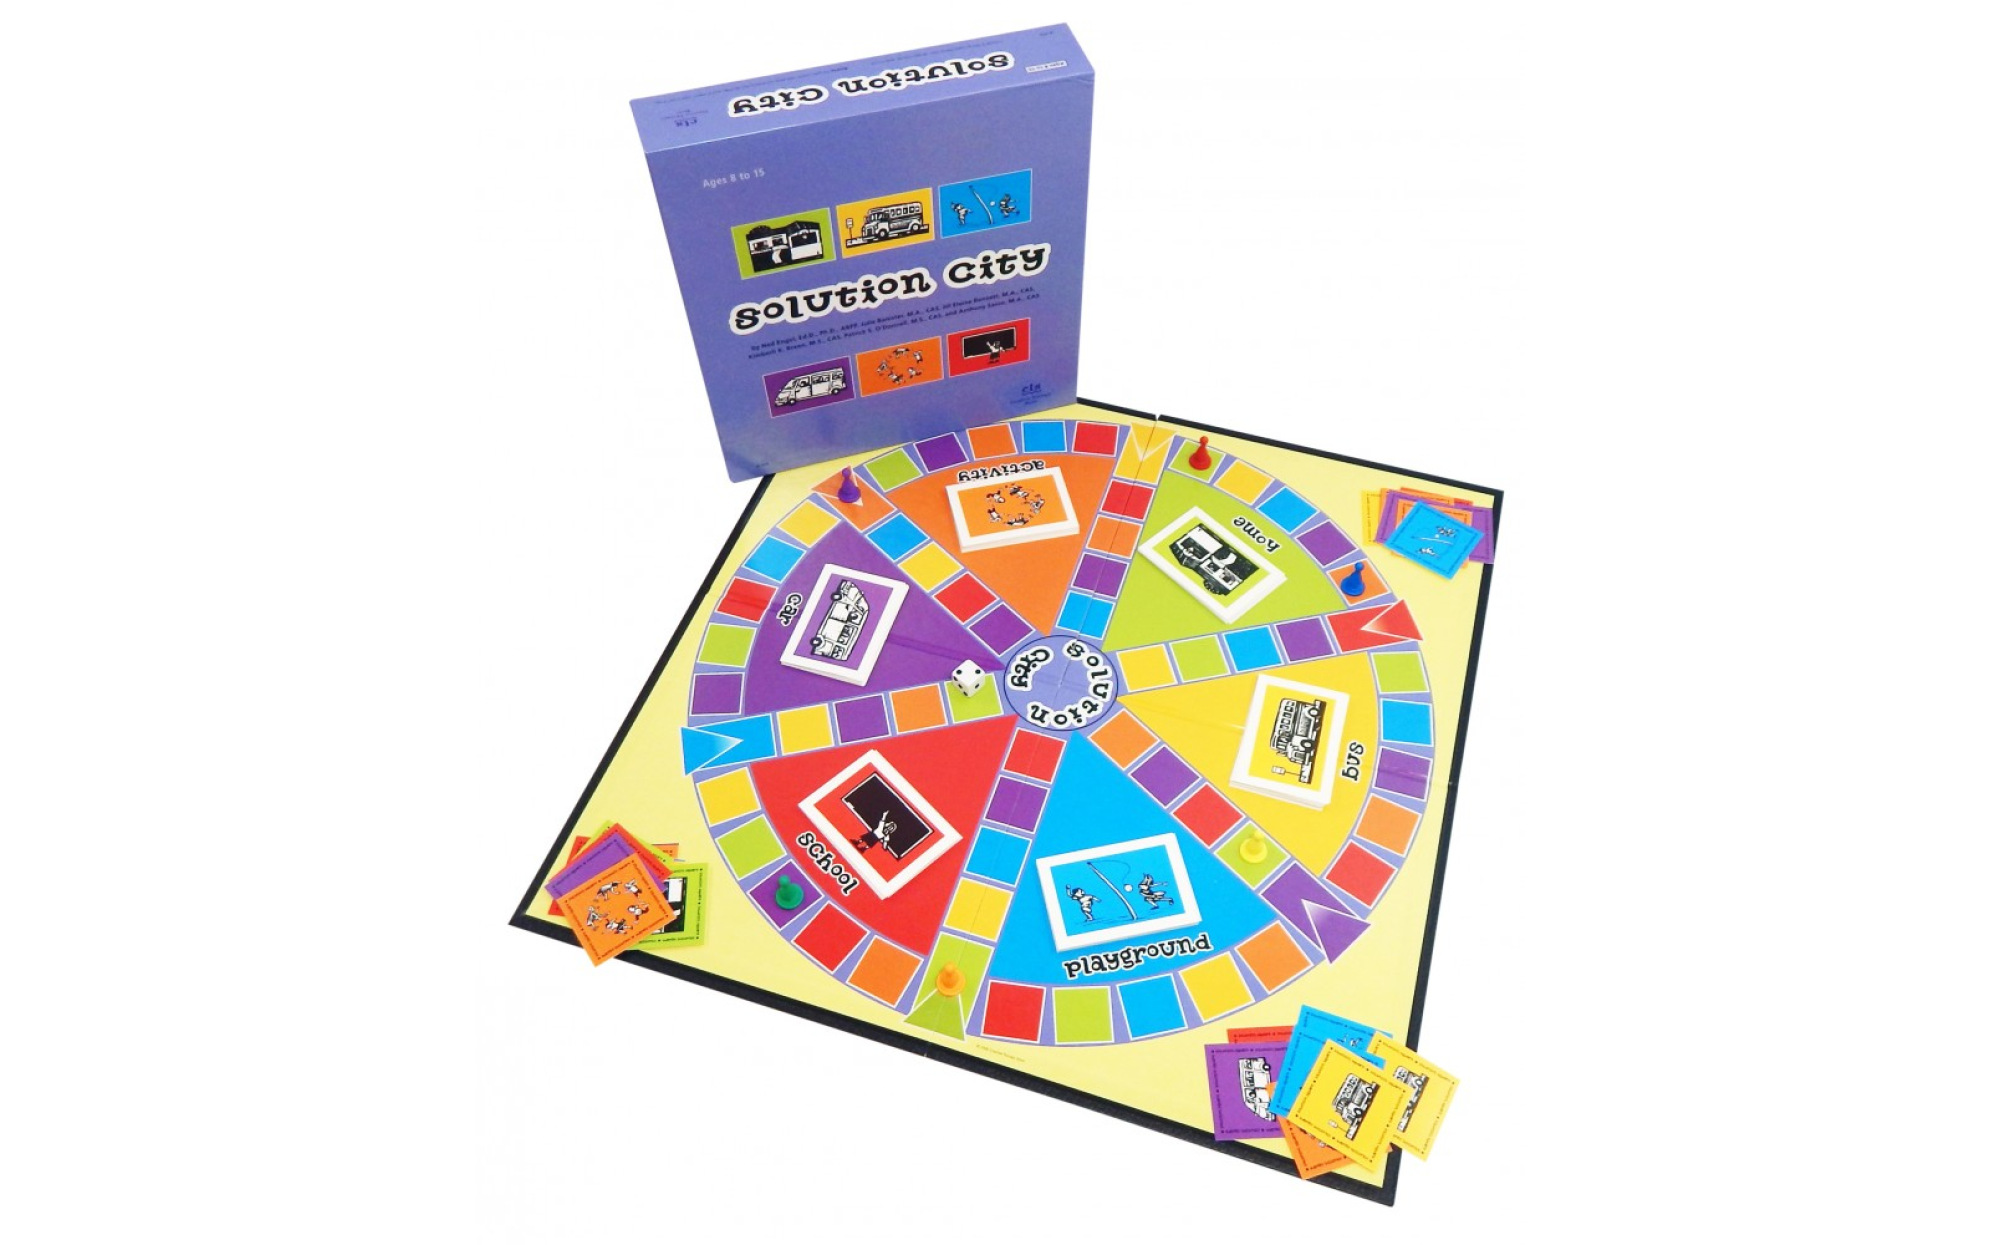 Solution City Board Game – Games